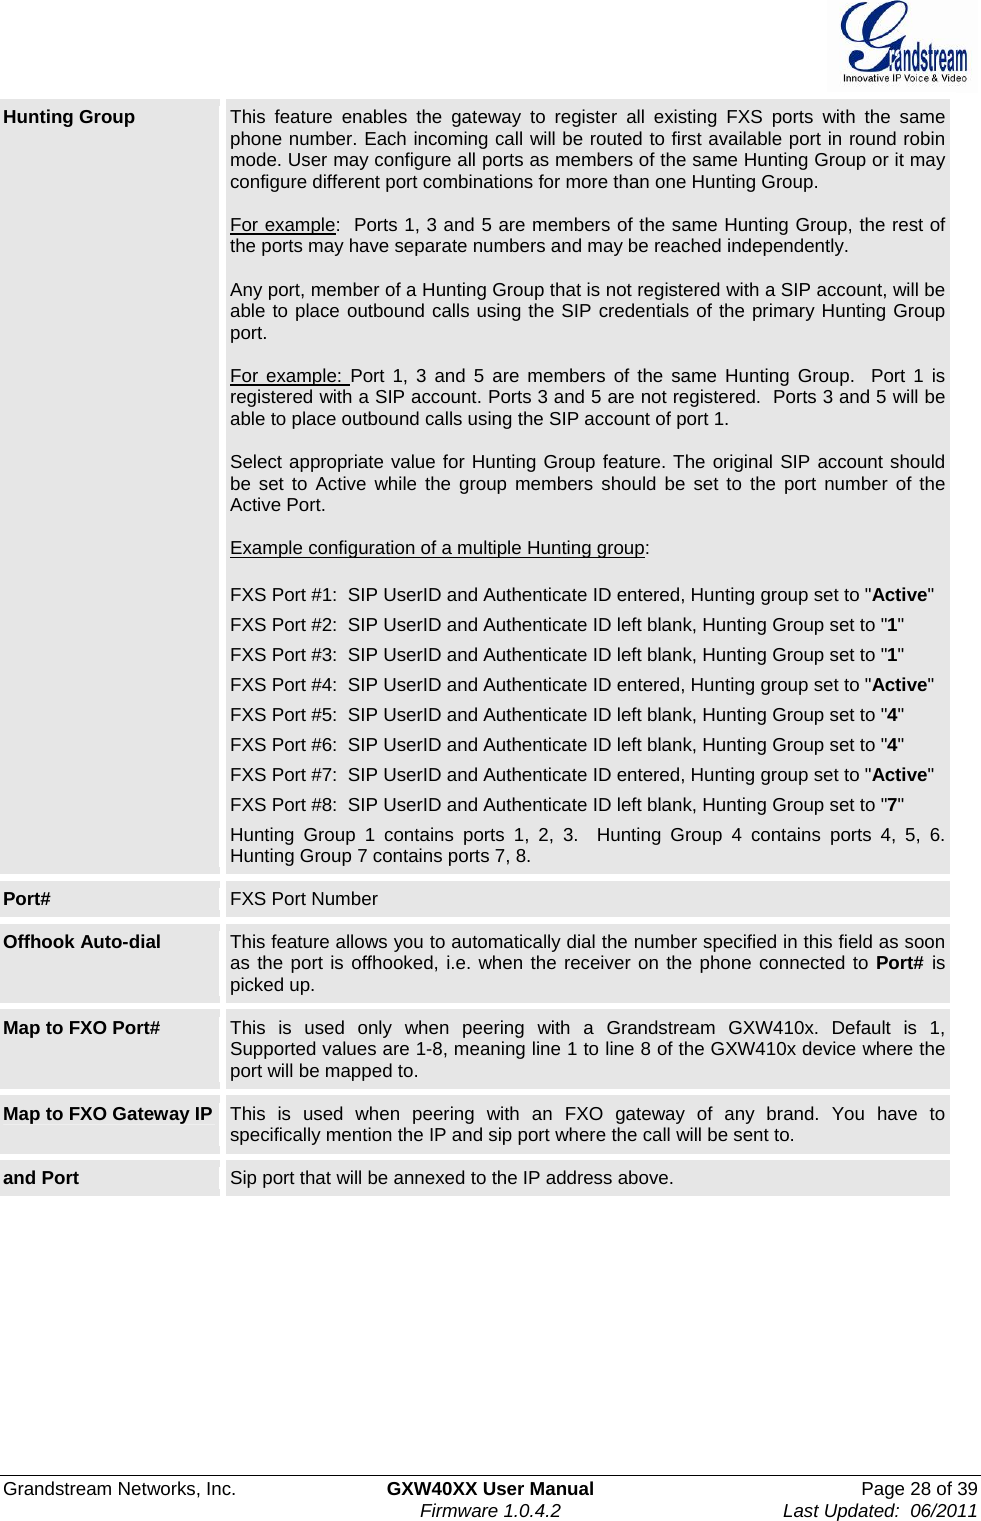  Grandstream Networks, Inc.  GXW40XX User Manual  Page 28 of 39    Firmware 1.0.4.2  Last Updated:  06/2011  Hunting Group  This feature enables the gateway to register all existing FXS ports with the same phone number. Each incoming call will be routed to first available port in round robinmode. User may configure all ports as members of the same Hunting Group or it may configure different port combinations for more than one Hunting Group.   For example:  Ports 1, 3 and 5 are members of the same Hunting Group, the rest of the ports may have separate numbers and may be reached independently.   Any port, member of a Hunting Group that is not registered with a SIP account, will be able to place outbound calls using the SIP credentials of the primary Hunting Group port.   For example: Port 1, 3 and 5 are members of the same Hunting Group.  Port 1 is registered with a SIP account. Ports 3 and 5 are not registered.  Ports 3 and 5 will be able to place outbound calls using the SIP account of port 1.  Select appropriate value for Hunting Group feature. The original SIP account should be set to Active while the group members should be set to the port number of the Active Port.   Example configuration of a multiple Hunting group:  FXS Port #1:  SIP UserID and Authenticate ID entered, Hunting group set to &quot;Active&quot; FXS Port #2:  SIP UserID and Authenticate ID left blank, Hunting Group set to &quot;1&quot; FXS Port #3:  SIP UserID and Authenticate ID left blank, Hunting Group set to &quot;1&quot; FXS Port #4:  SIP UserID and Authenticate ID entered, Hunting group set to &quot;Active&quot; FXS Port #5:  SIP UserID and Authenticate ID left blank, Hunting Group set to &quot;4&quot; FXS Port #6:  SIP UserID and Authenticate ID left blank, Hunting Group set to &quot;4&quot; FXS Port #7:  SIP UserID and Authenticate ID entered, Hunting group set to &quot;Active&quot; FXS Port #8:  SIP UserID and Authenticate ID left blank, Hunting Group set to &quot;7&quot; Hunting Group 1 contains ports 1, 2, 3.  Hunting Group 4 contains ports 4, 5, 6. Hunting Group 7 contains ports 7, 8. Port#    FXS Port Number Offhook Auto-dial  This feature allows you to automatically dial the number specified in this field as soon as the port is offhooked, i.e. when the receiver on the phone connected to Port#  is picked up. Map to FXO Port#  This is used only when peering with a Grandstream GXW410x. Default is 1, Supported values are 1-8, meaning line 1 to line 8 of the GXW410x device where the port will be mapped to. Map to FXO Gateway IP  This is used when peering with an FXO gateway of any brand. You have to specifically mention the IP and sip port where the call will be sent to. and Port  Sip port that will be annexed to the IP address above.   